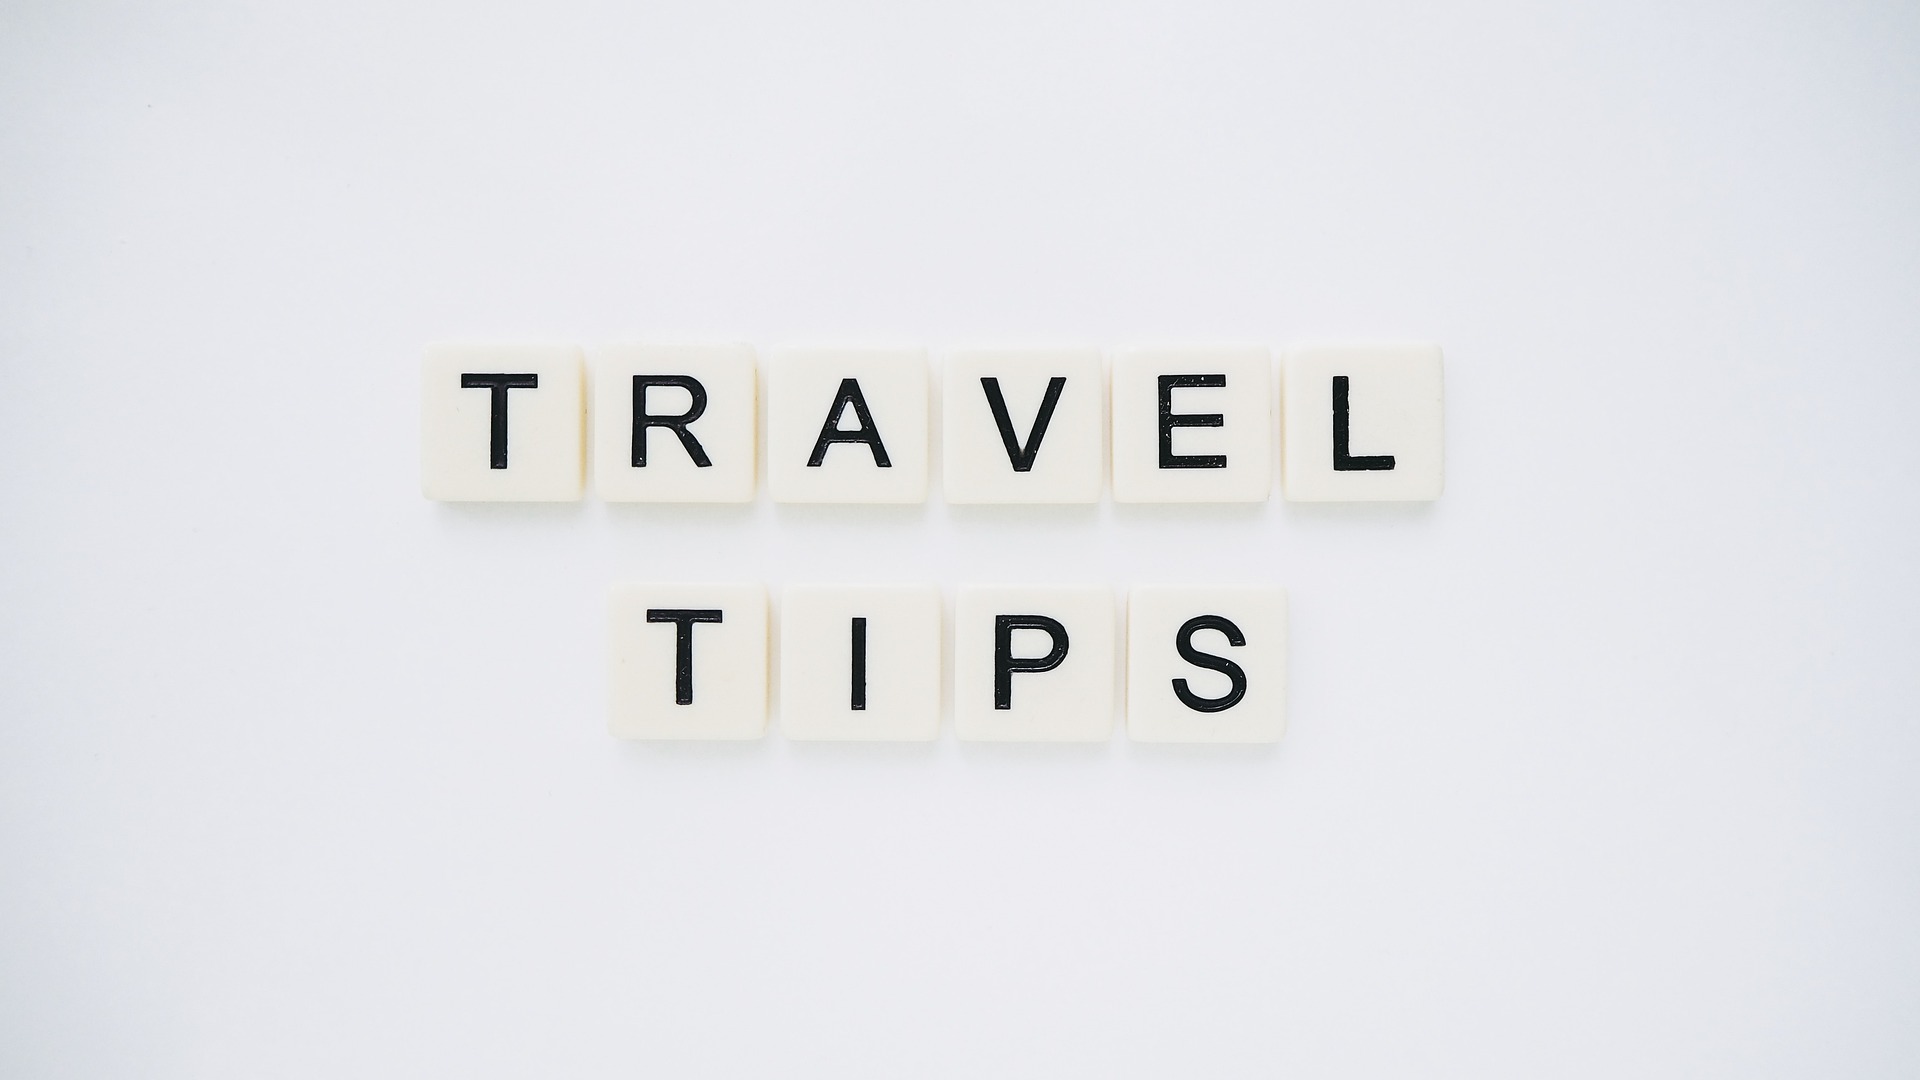 Travel Insurance Tips - is it a Need?